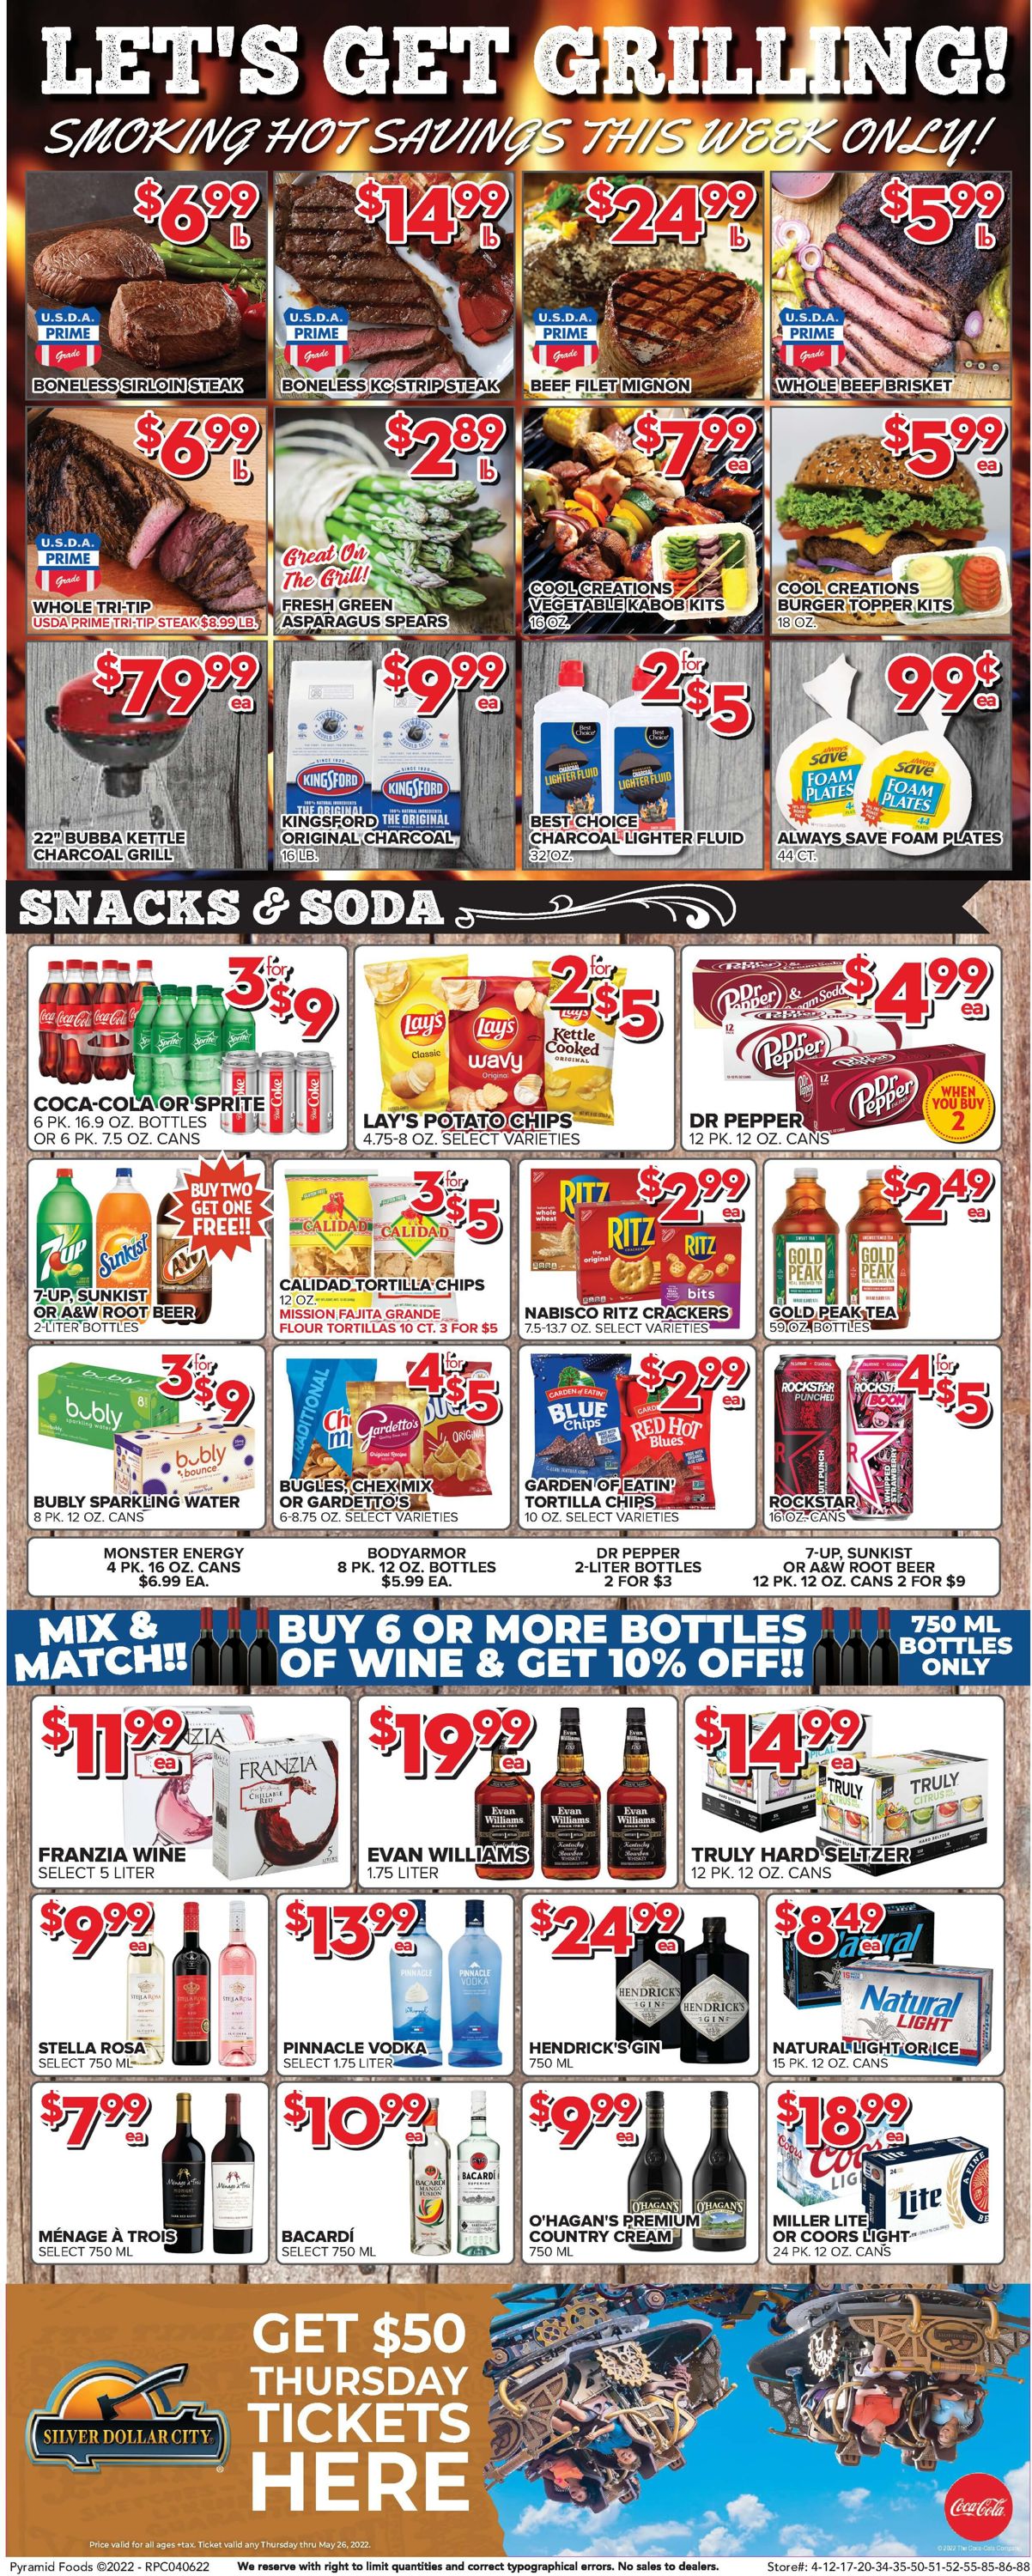 Price Cutter EASTER 2022 Weekly Ad Circular - valid 04/06-04/12/2022 (Page 6)